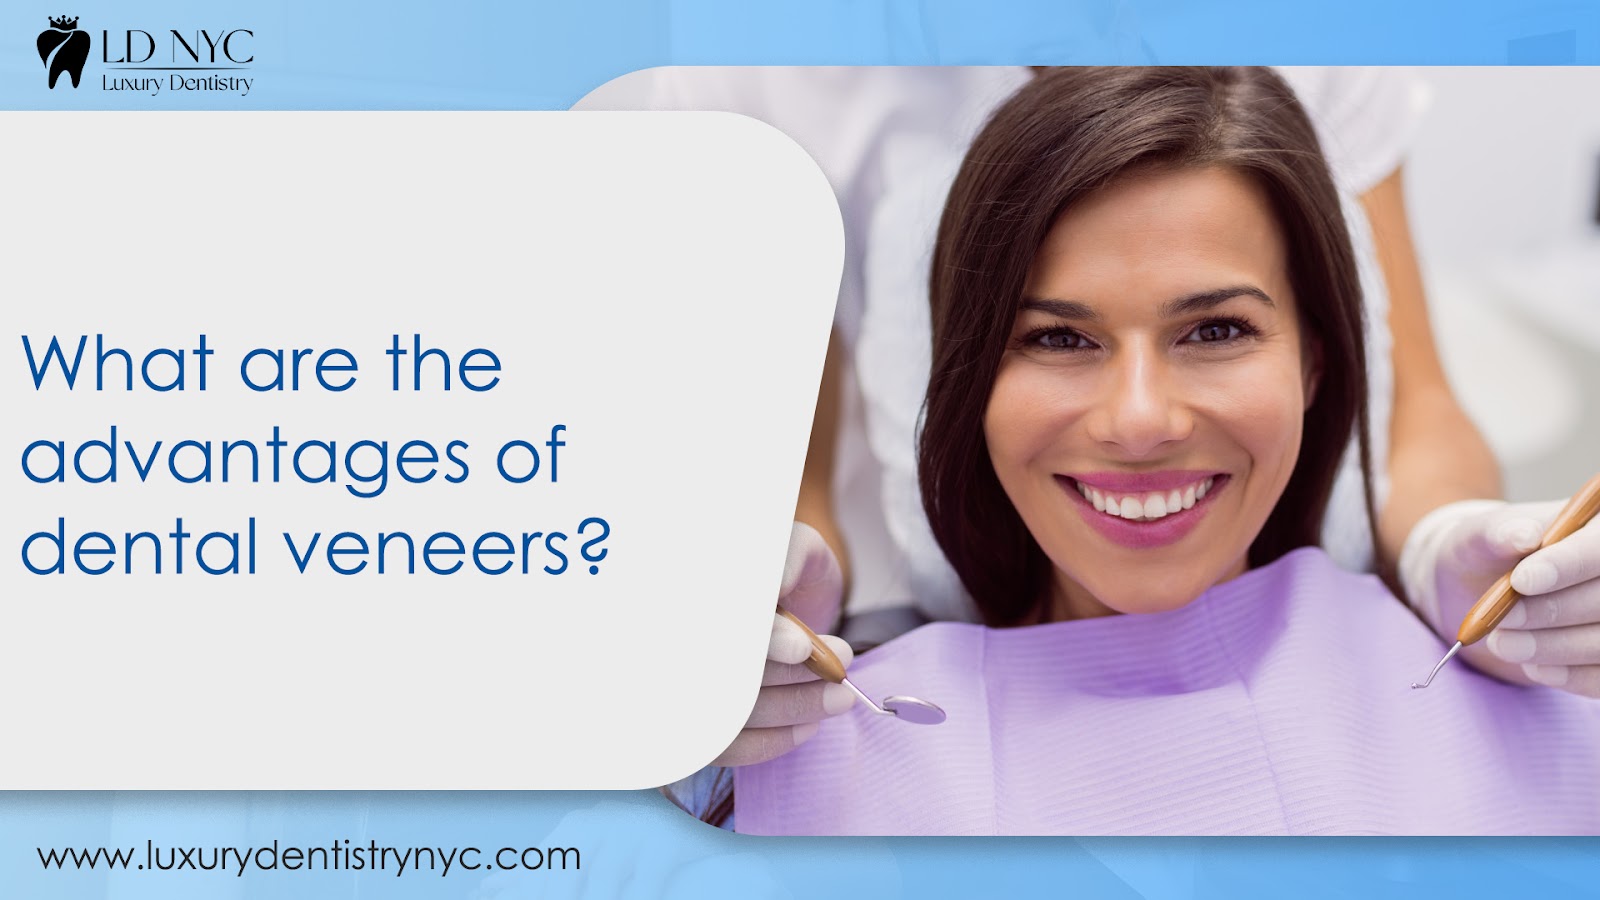 What are the advantages of dental veneers?